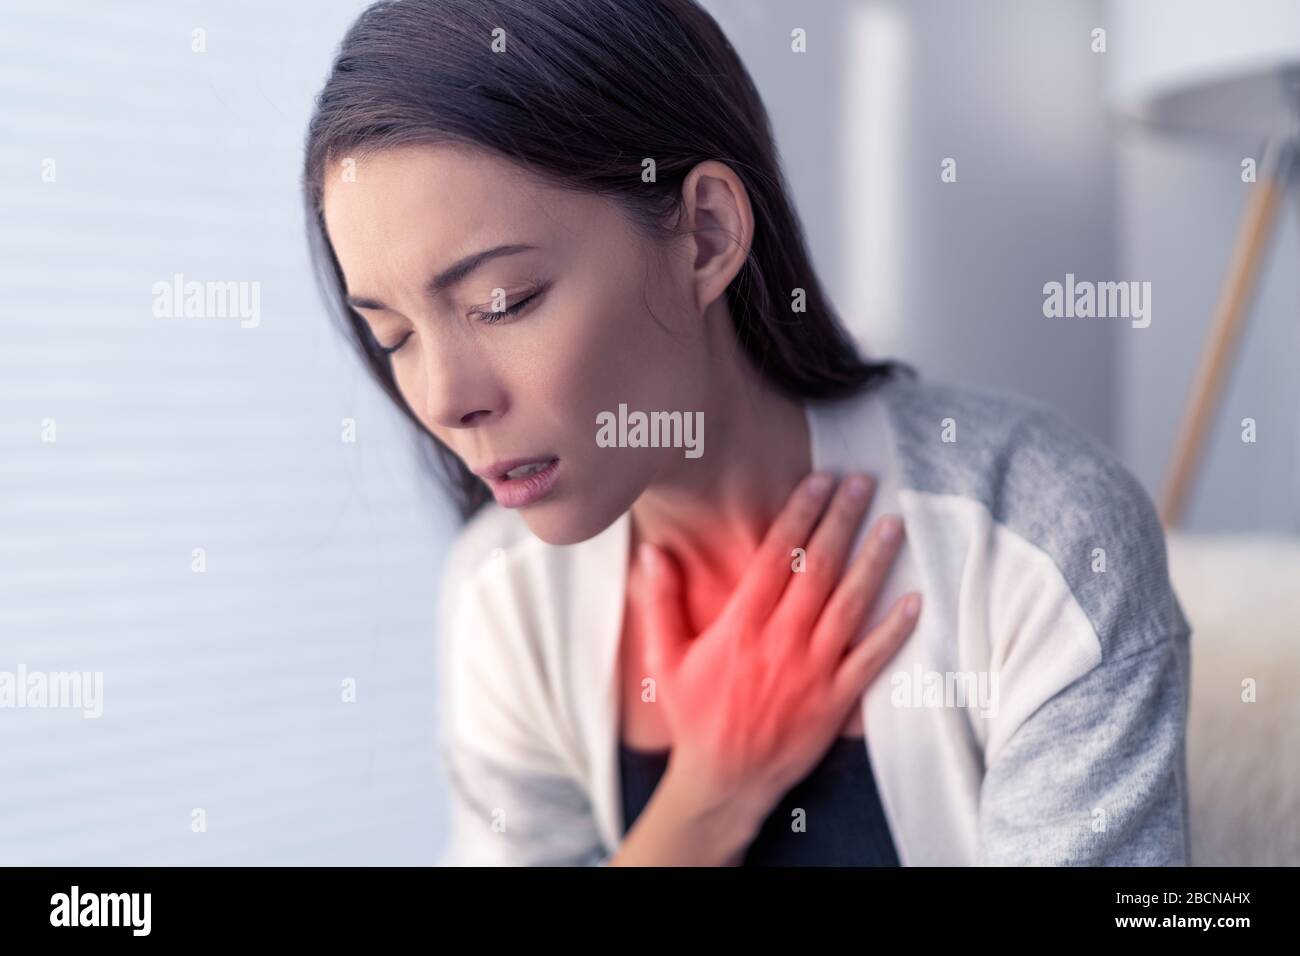 COVID-19 shortness of breath Coronavirus cough breathing problem. Asian woman touching chest in pain with red highlighted area. respiratory symptoms fever, coughing, body aches. Stock Photo